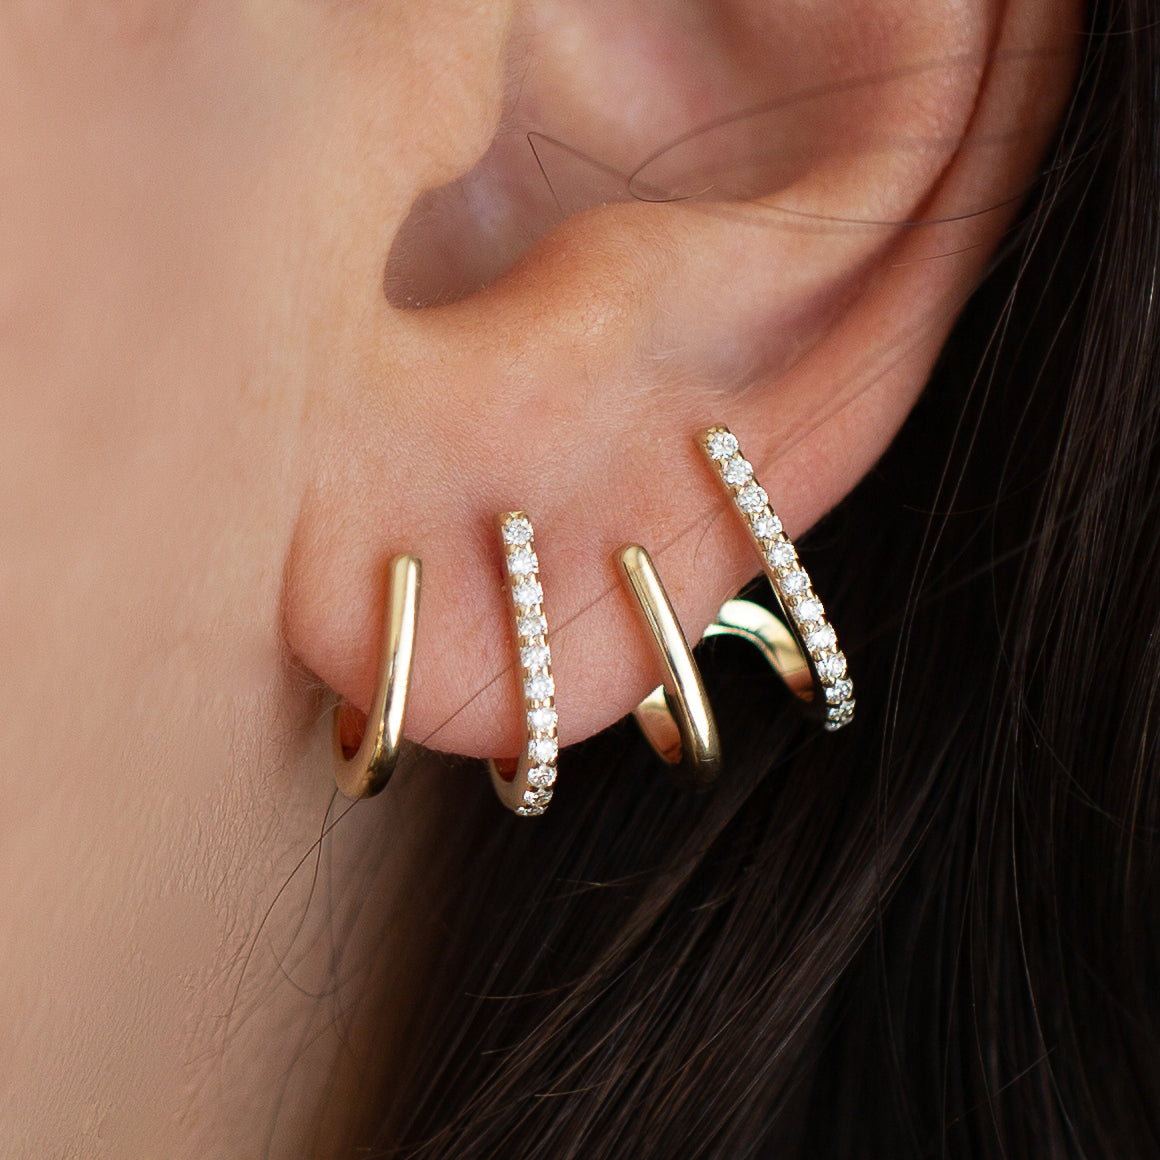 These minimalist solid 14K gold unique diamond illusion earring is the perfect multi-hoop claw stud hoops.